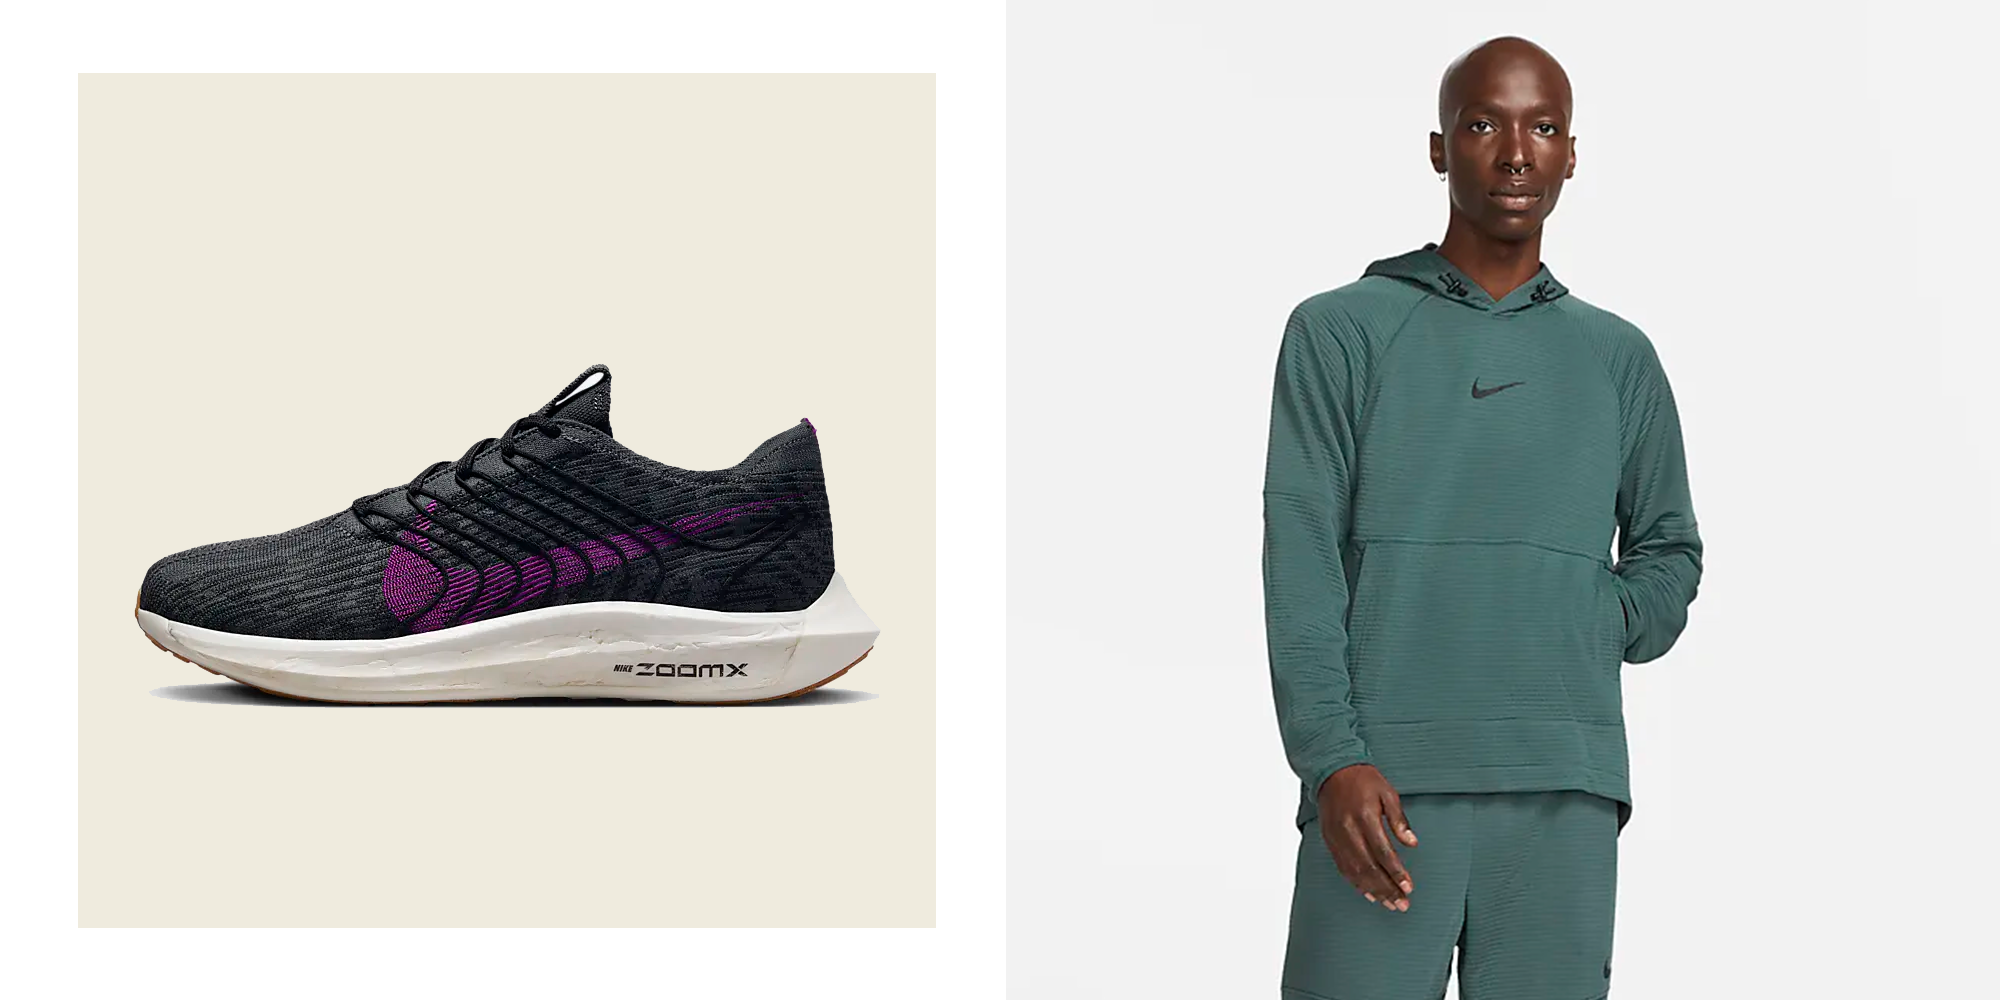 The Nike End of Save up 50% Gym Essentials